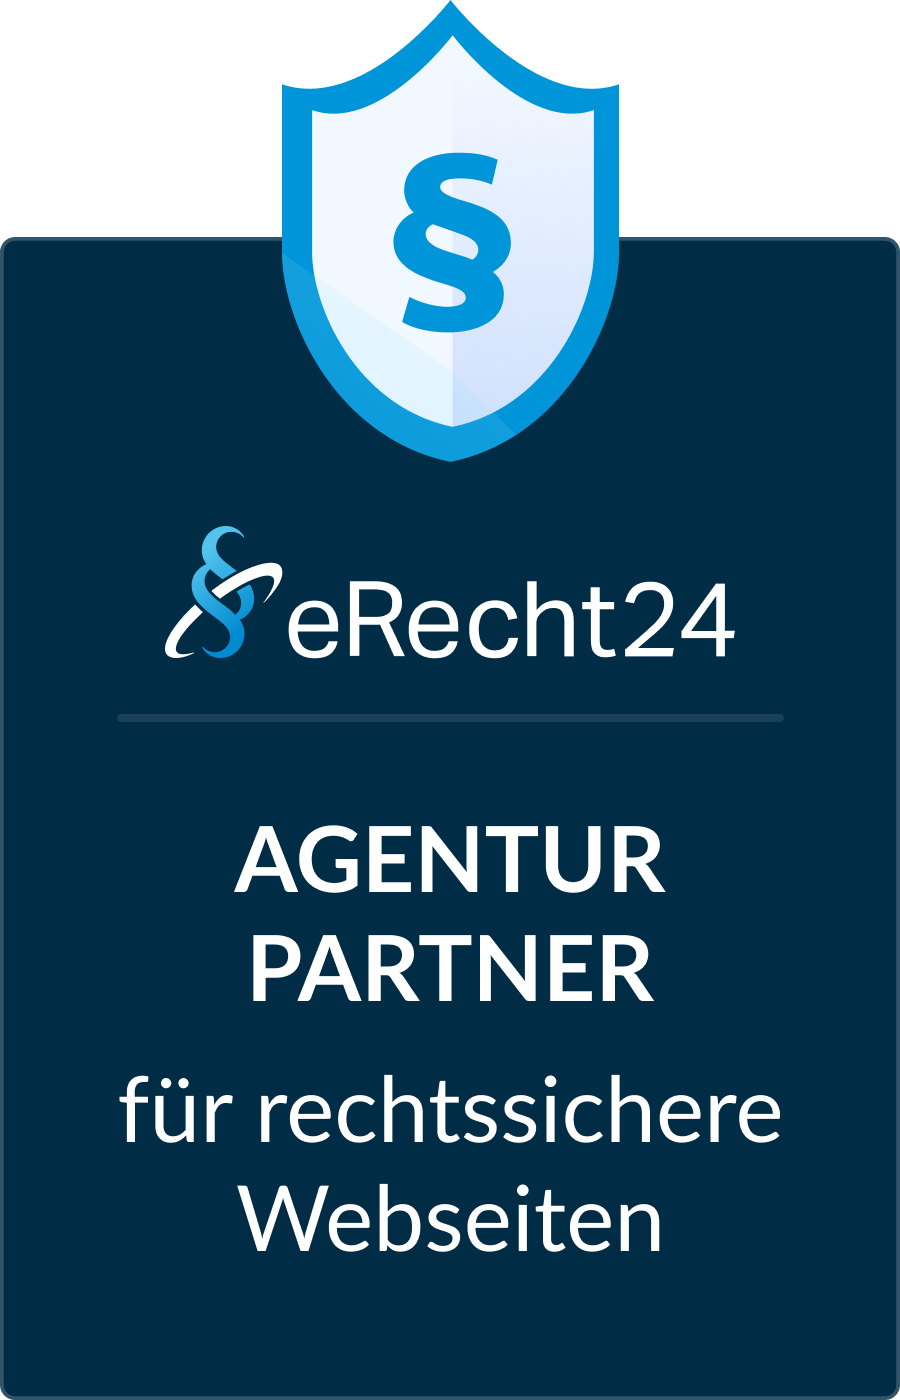 We are an agency partner of eRecht24 for legally compliant websites.